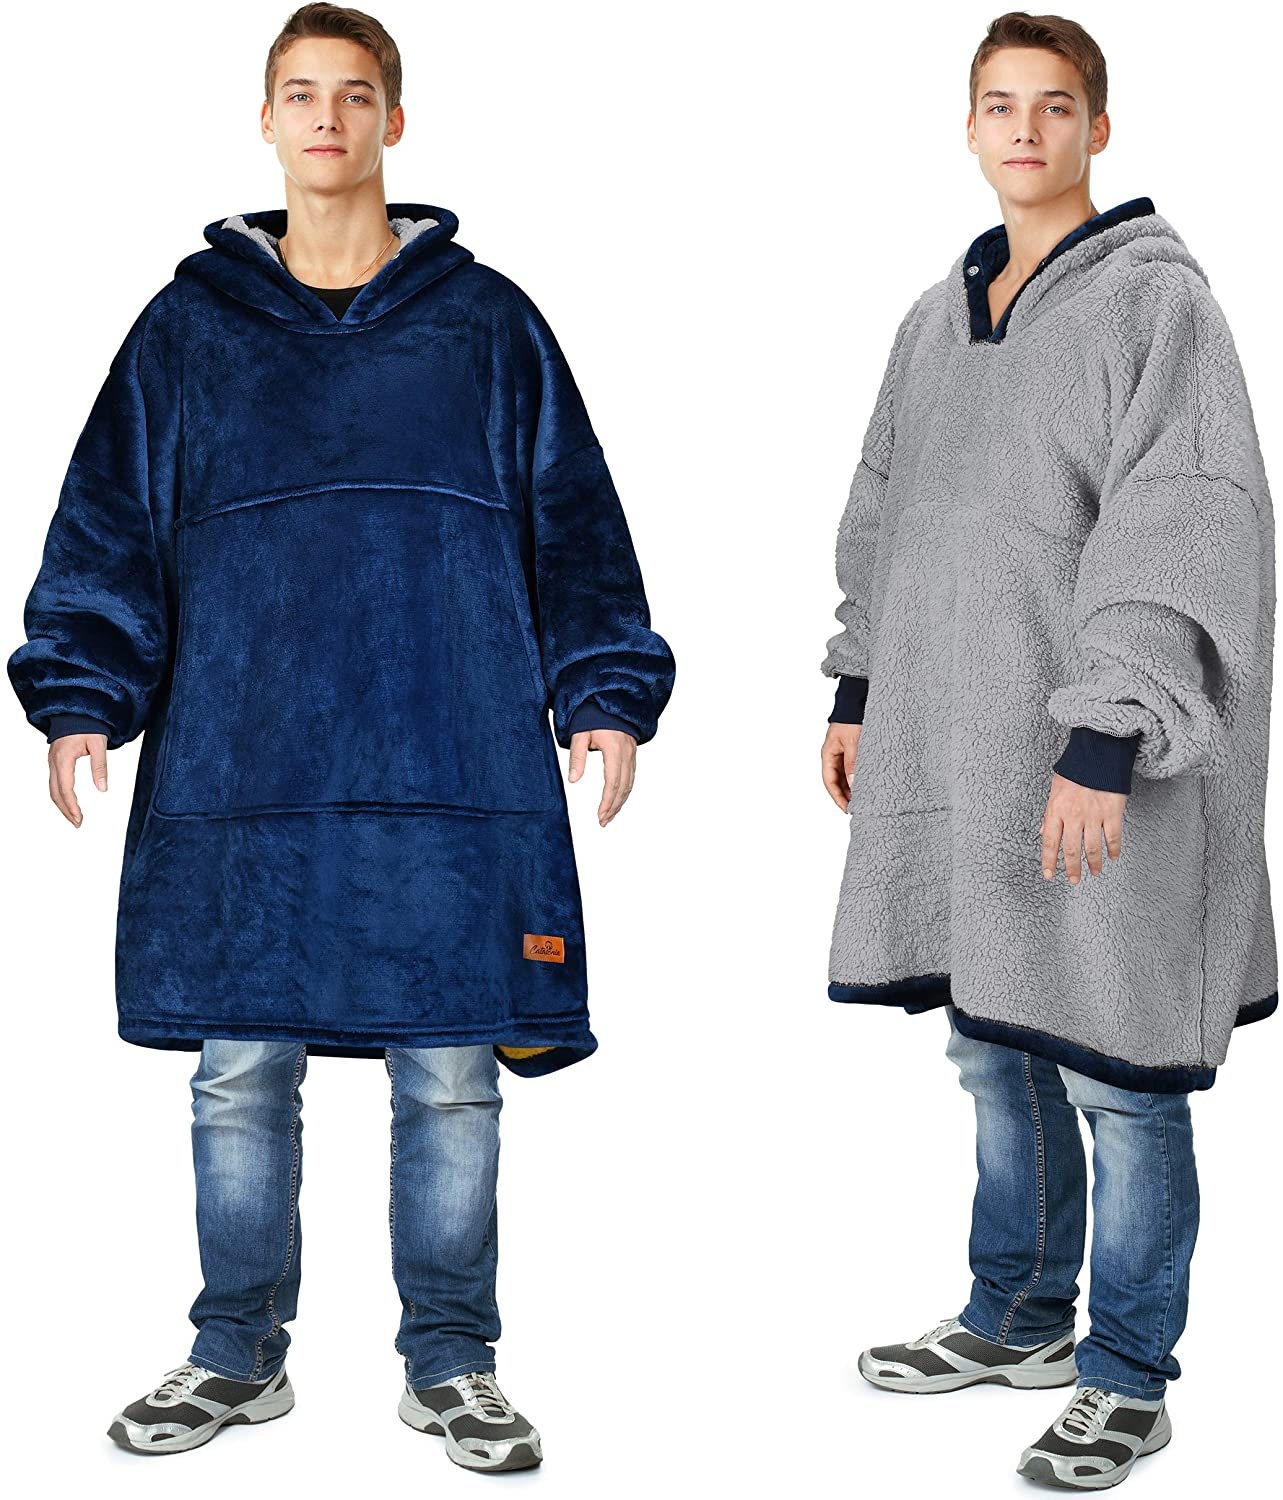 Oversized Wearable Blanket Hoodie Sweatshirt, Comfortable Sherpa Lounging Pullover for Adults